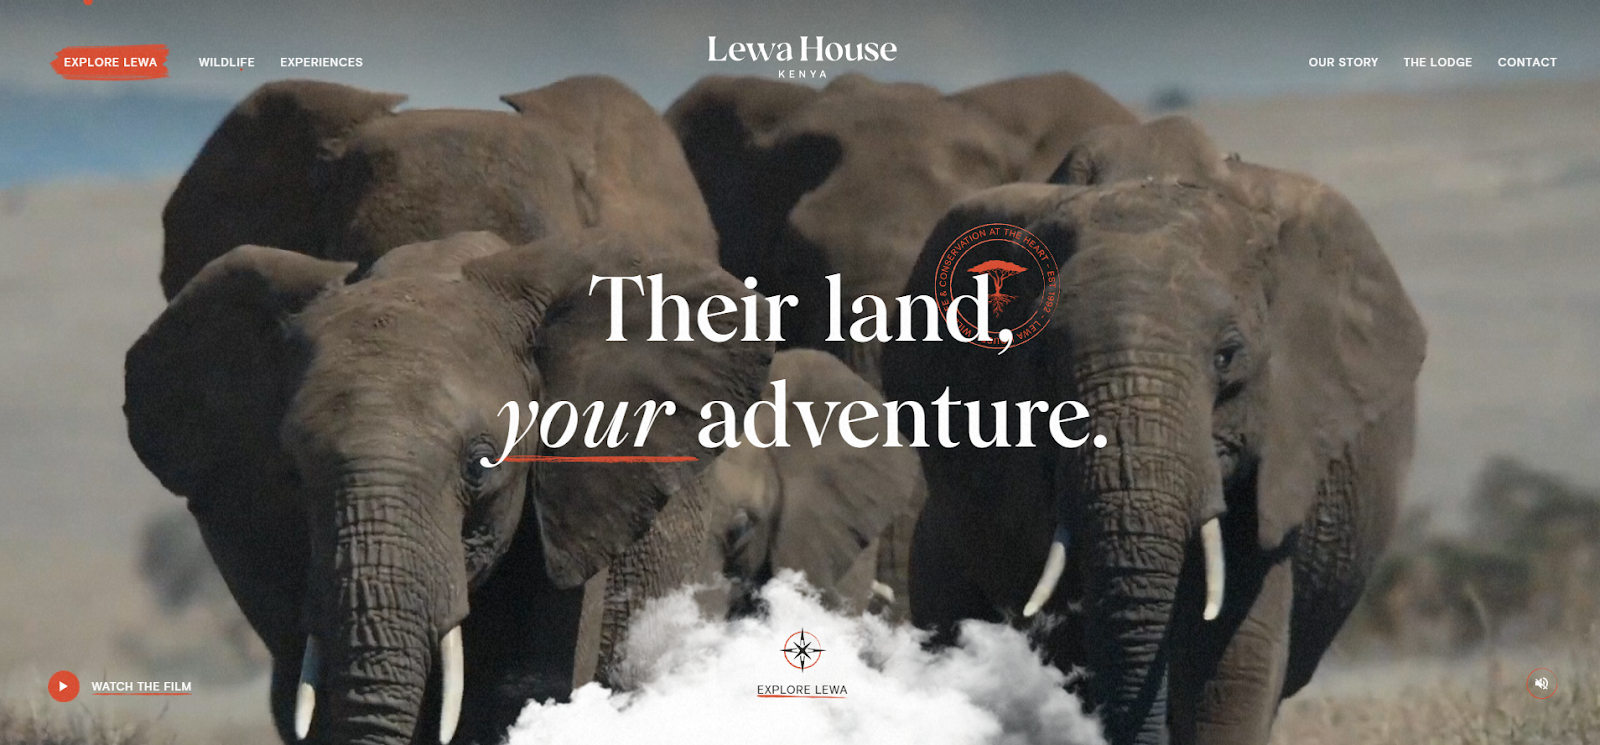 hotel website examples, Lewa House